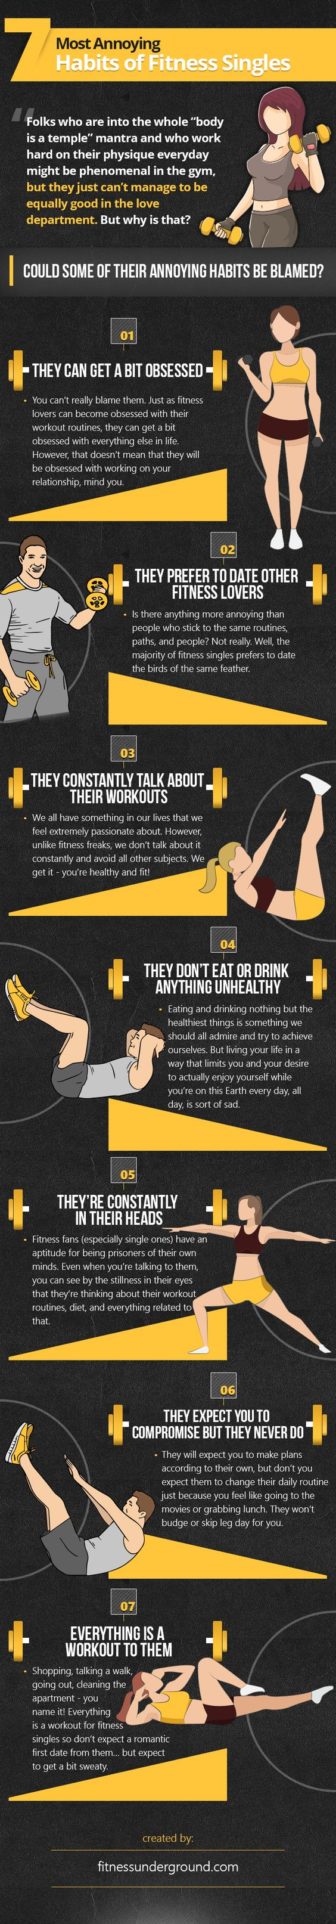 7 Most Annoying Habits of Fitness Singles